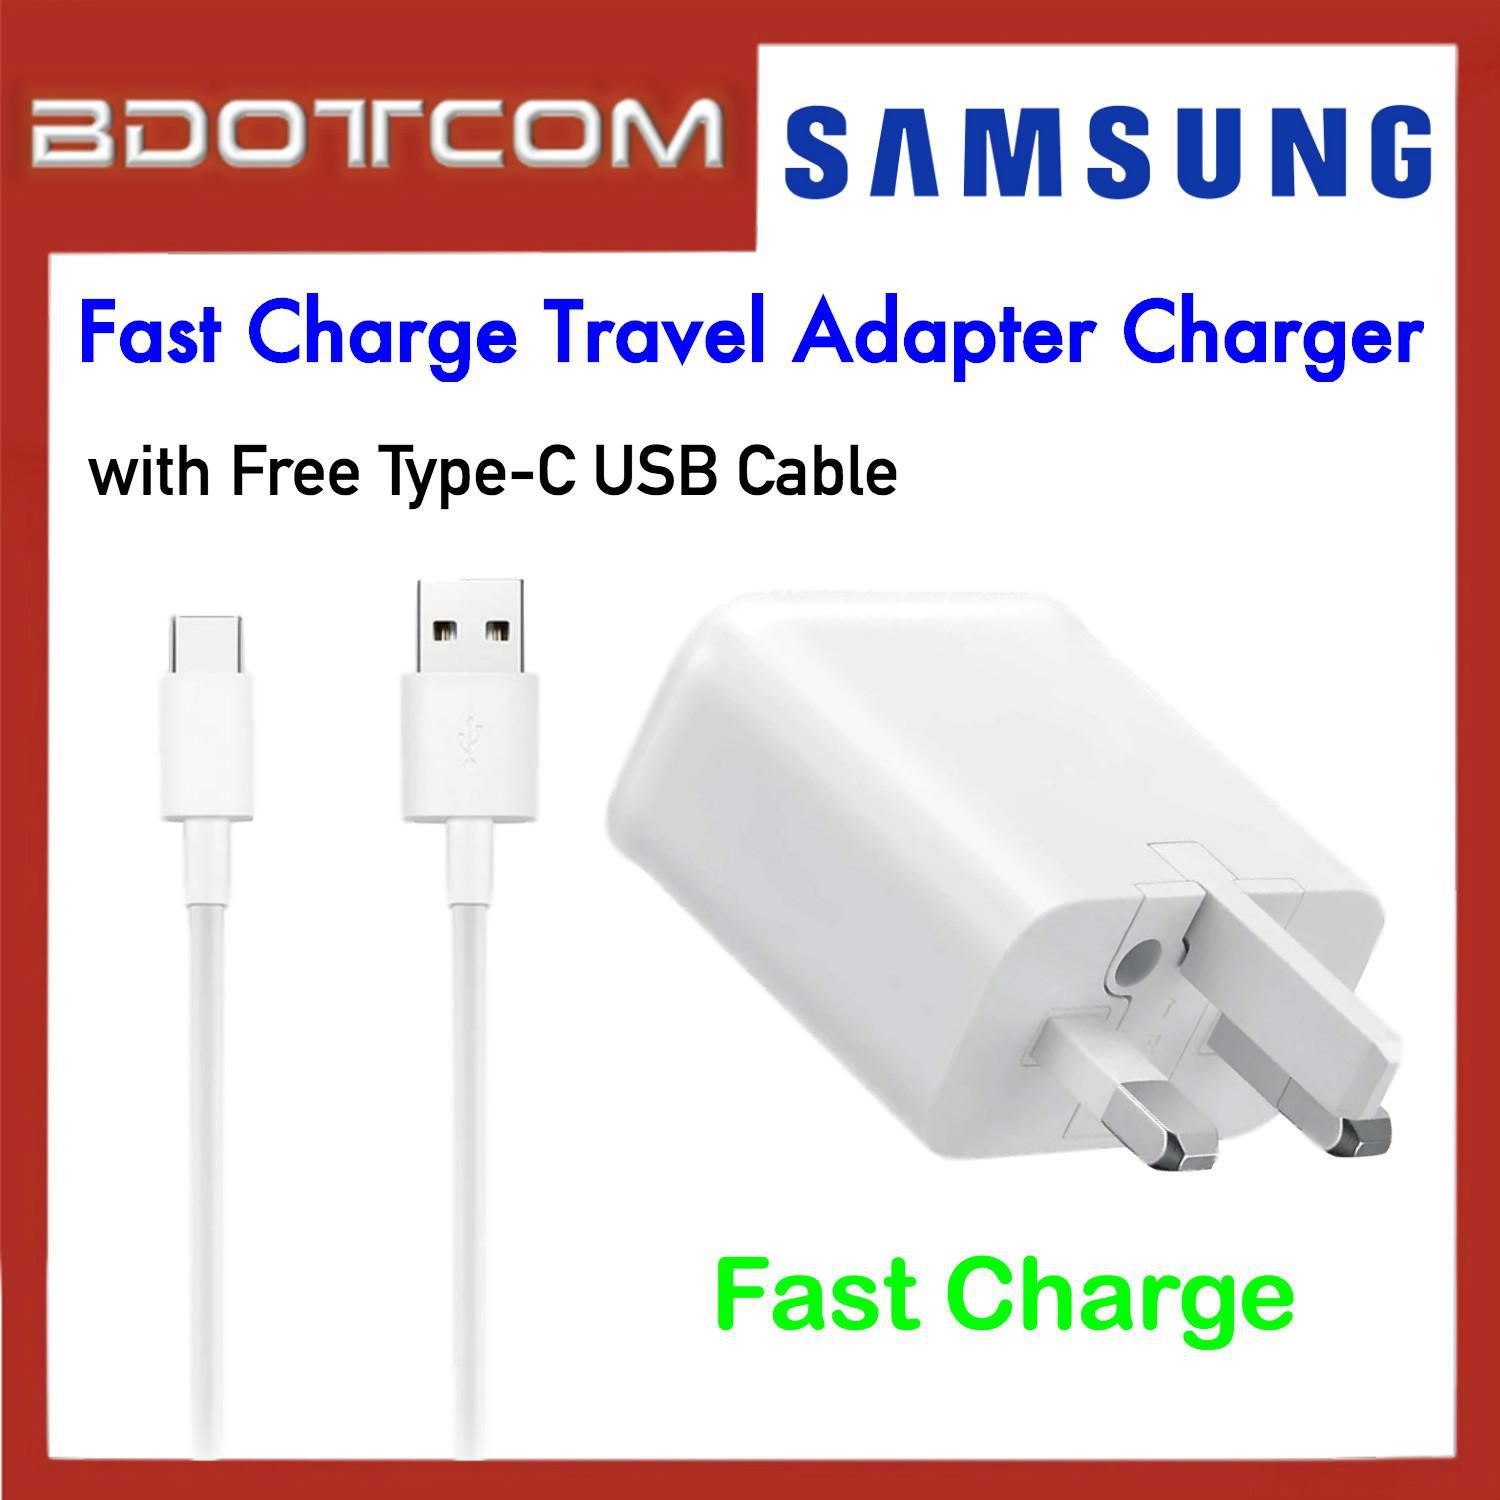 Samsung Travel Adapter Charger with TYPE-C USB Cable for Galaxy Tab S4